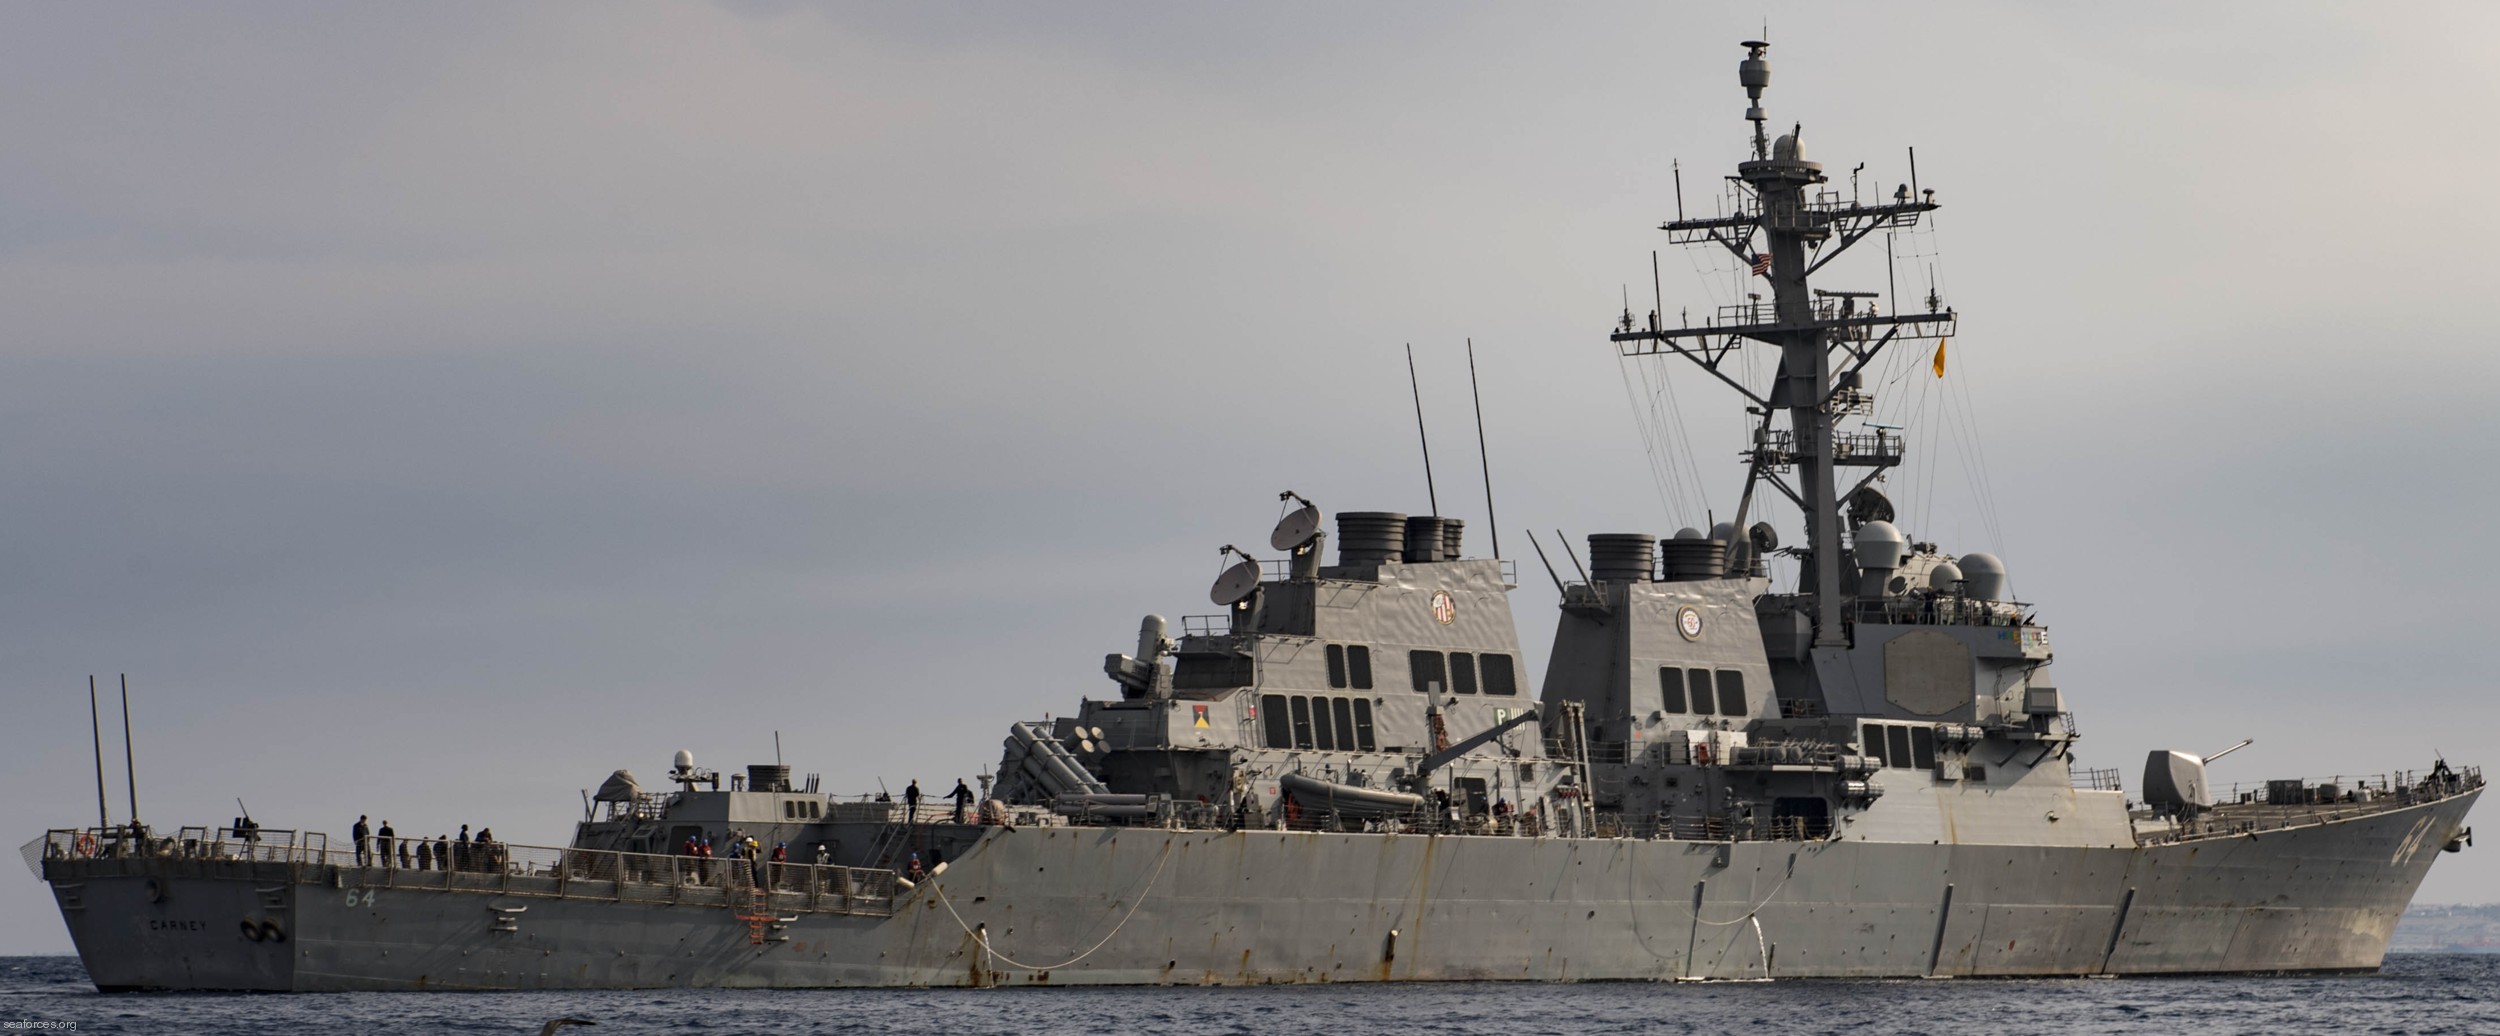 ddg-64 uss carney guided missile destroyer arleigh burke class 120